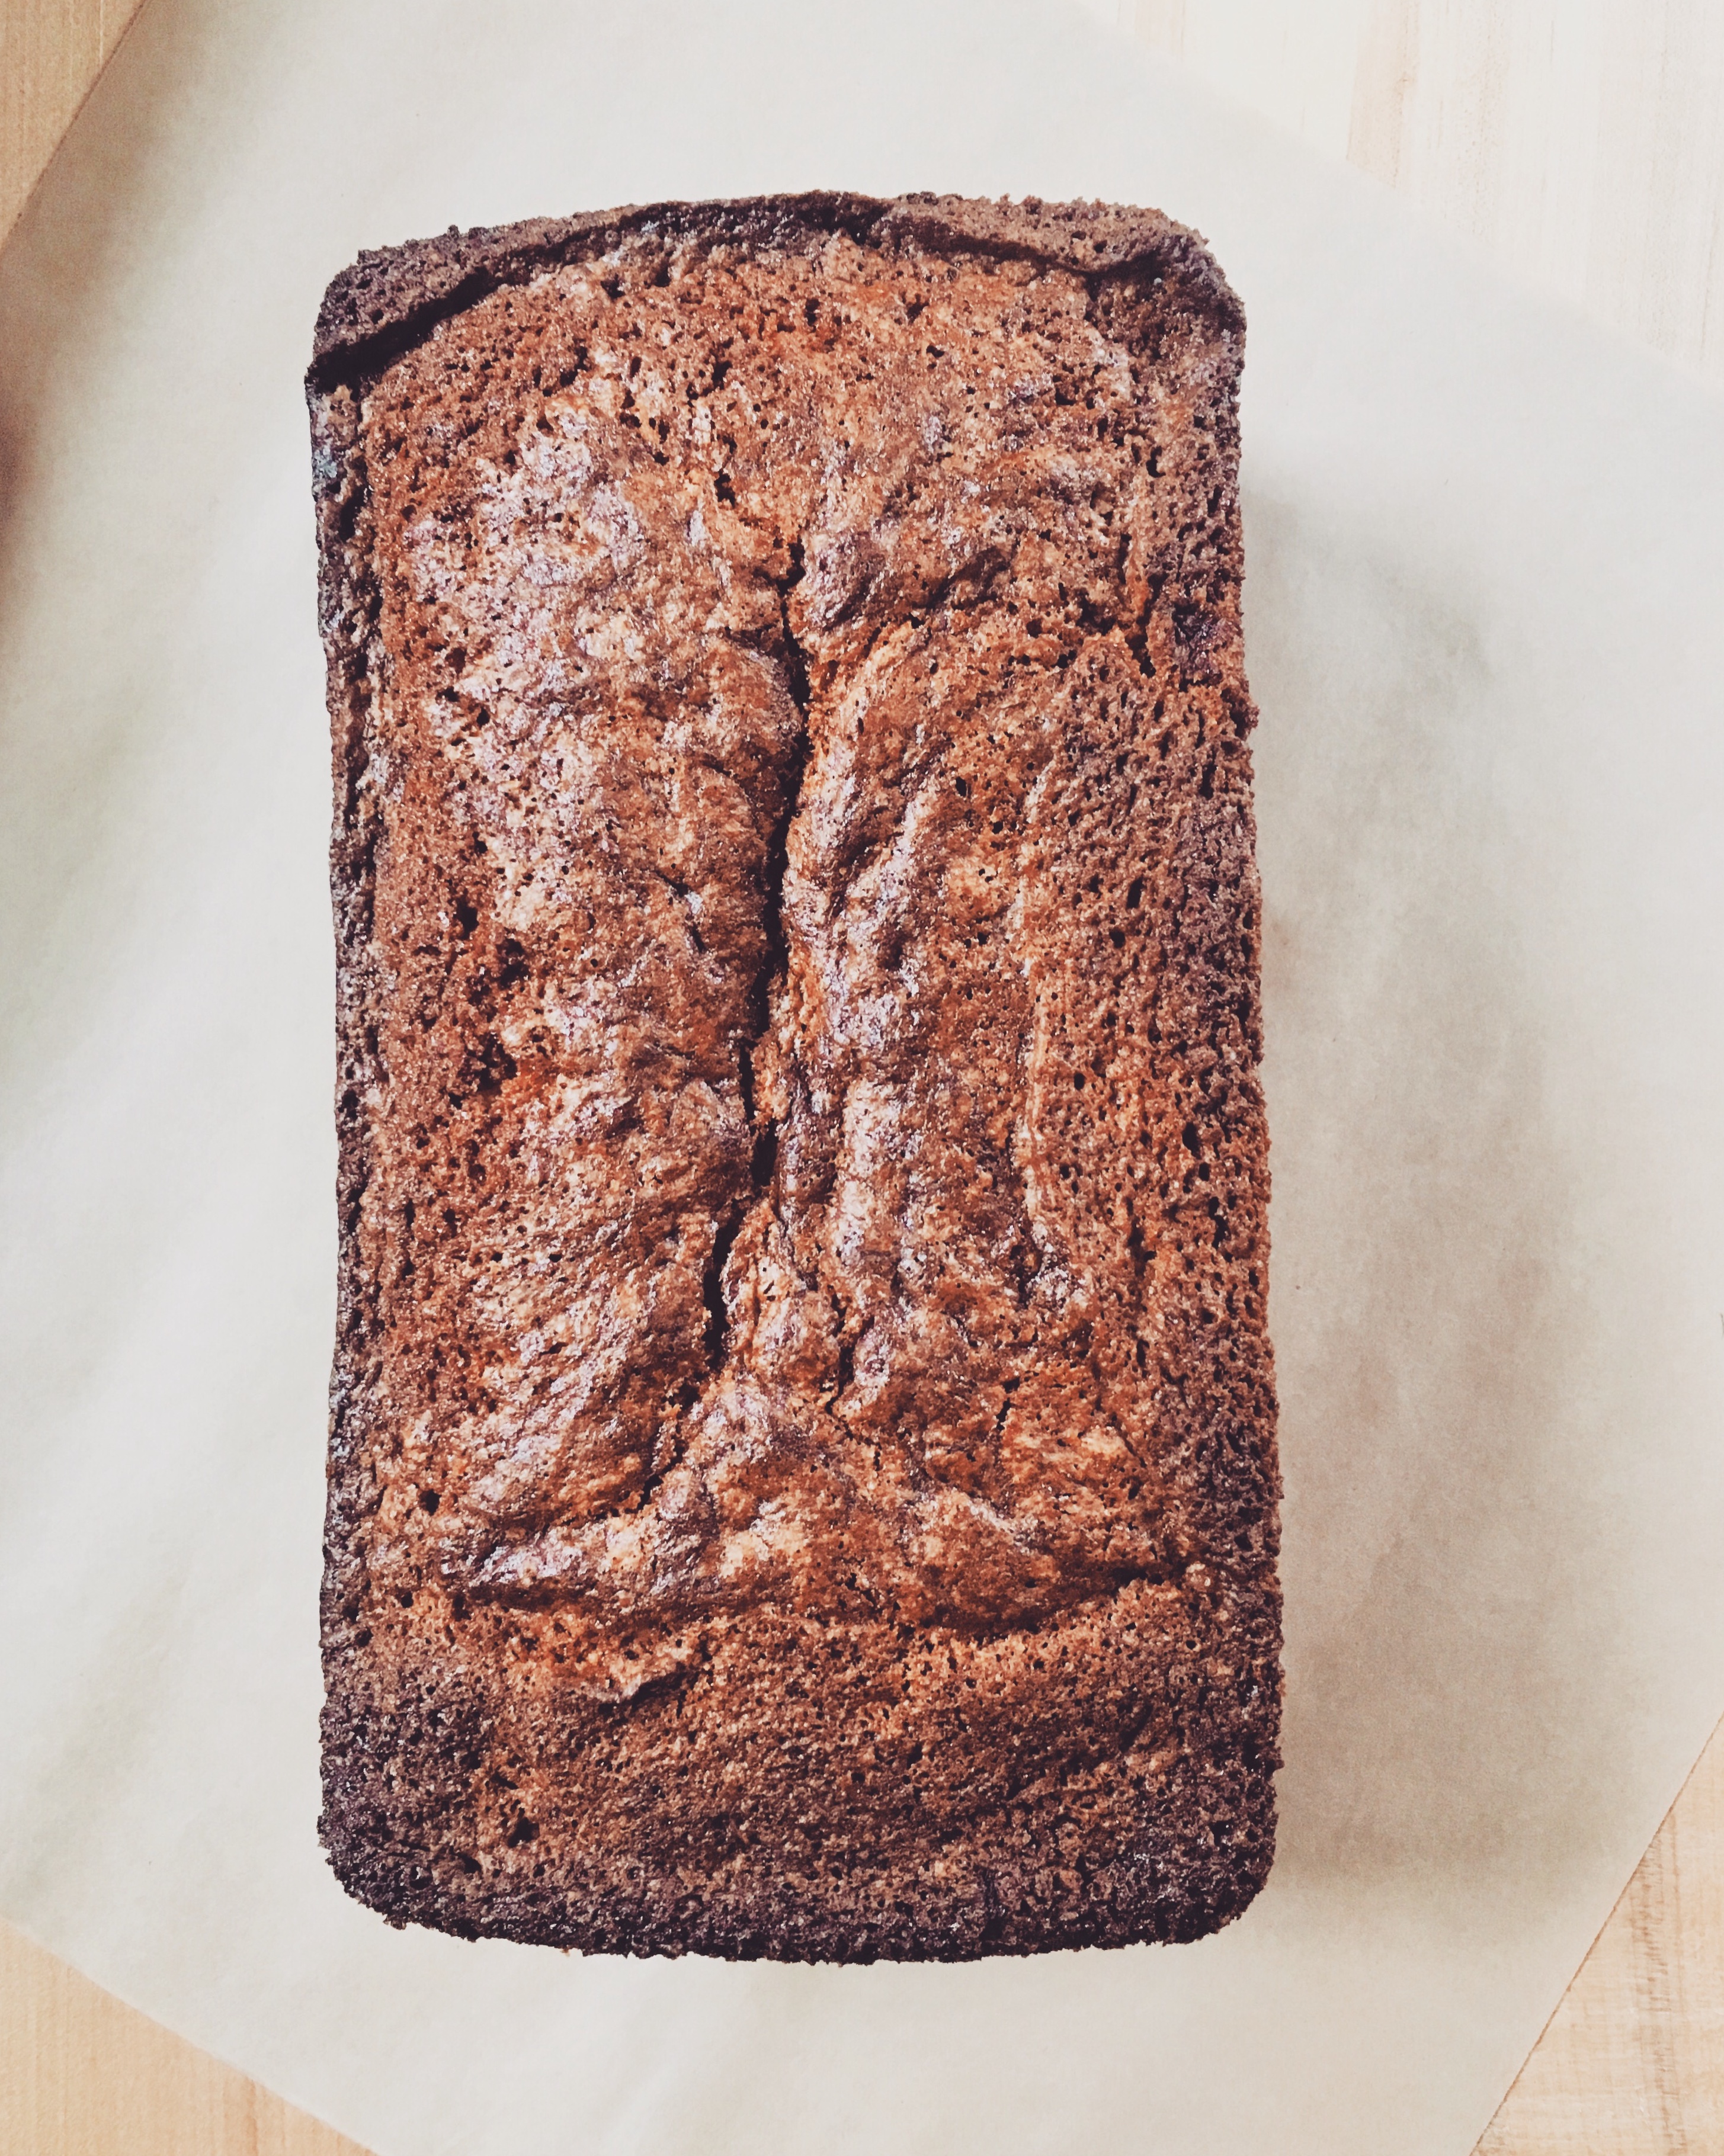 The Only Banana Bread Recipe You Need